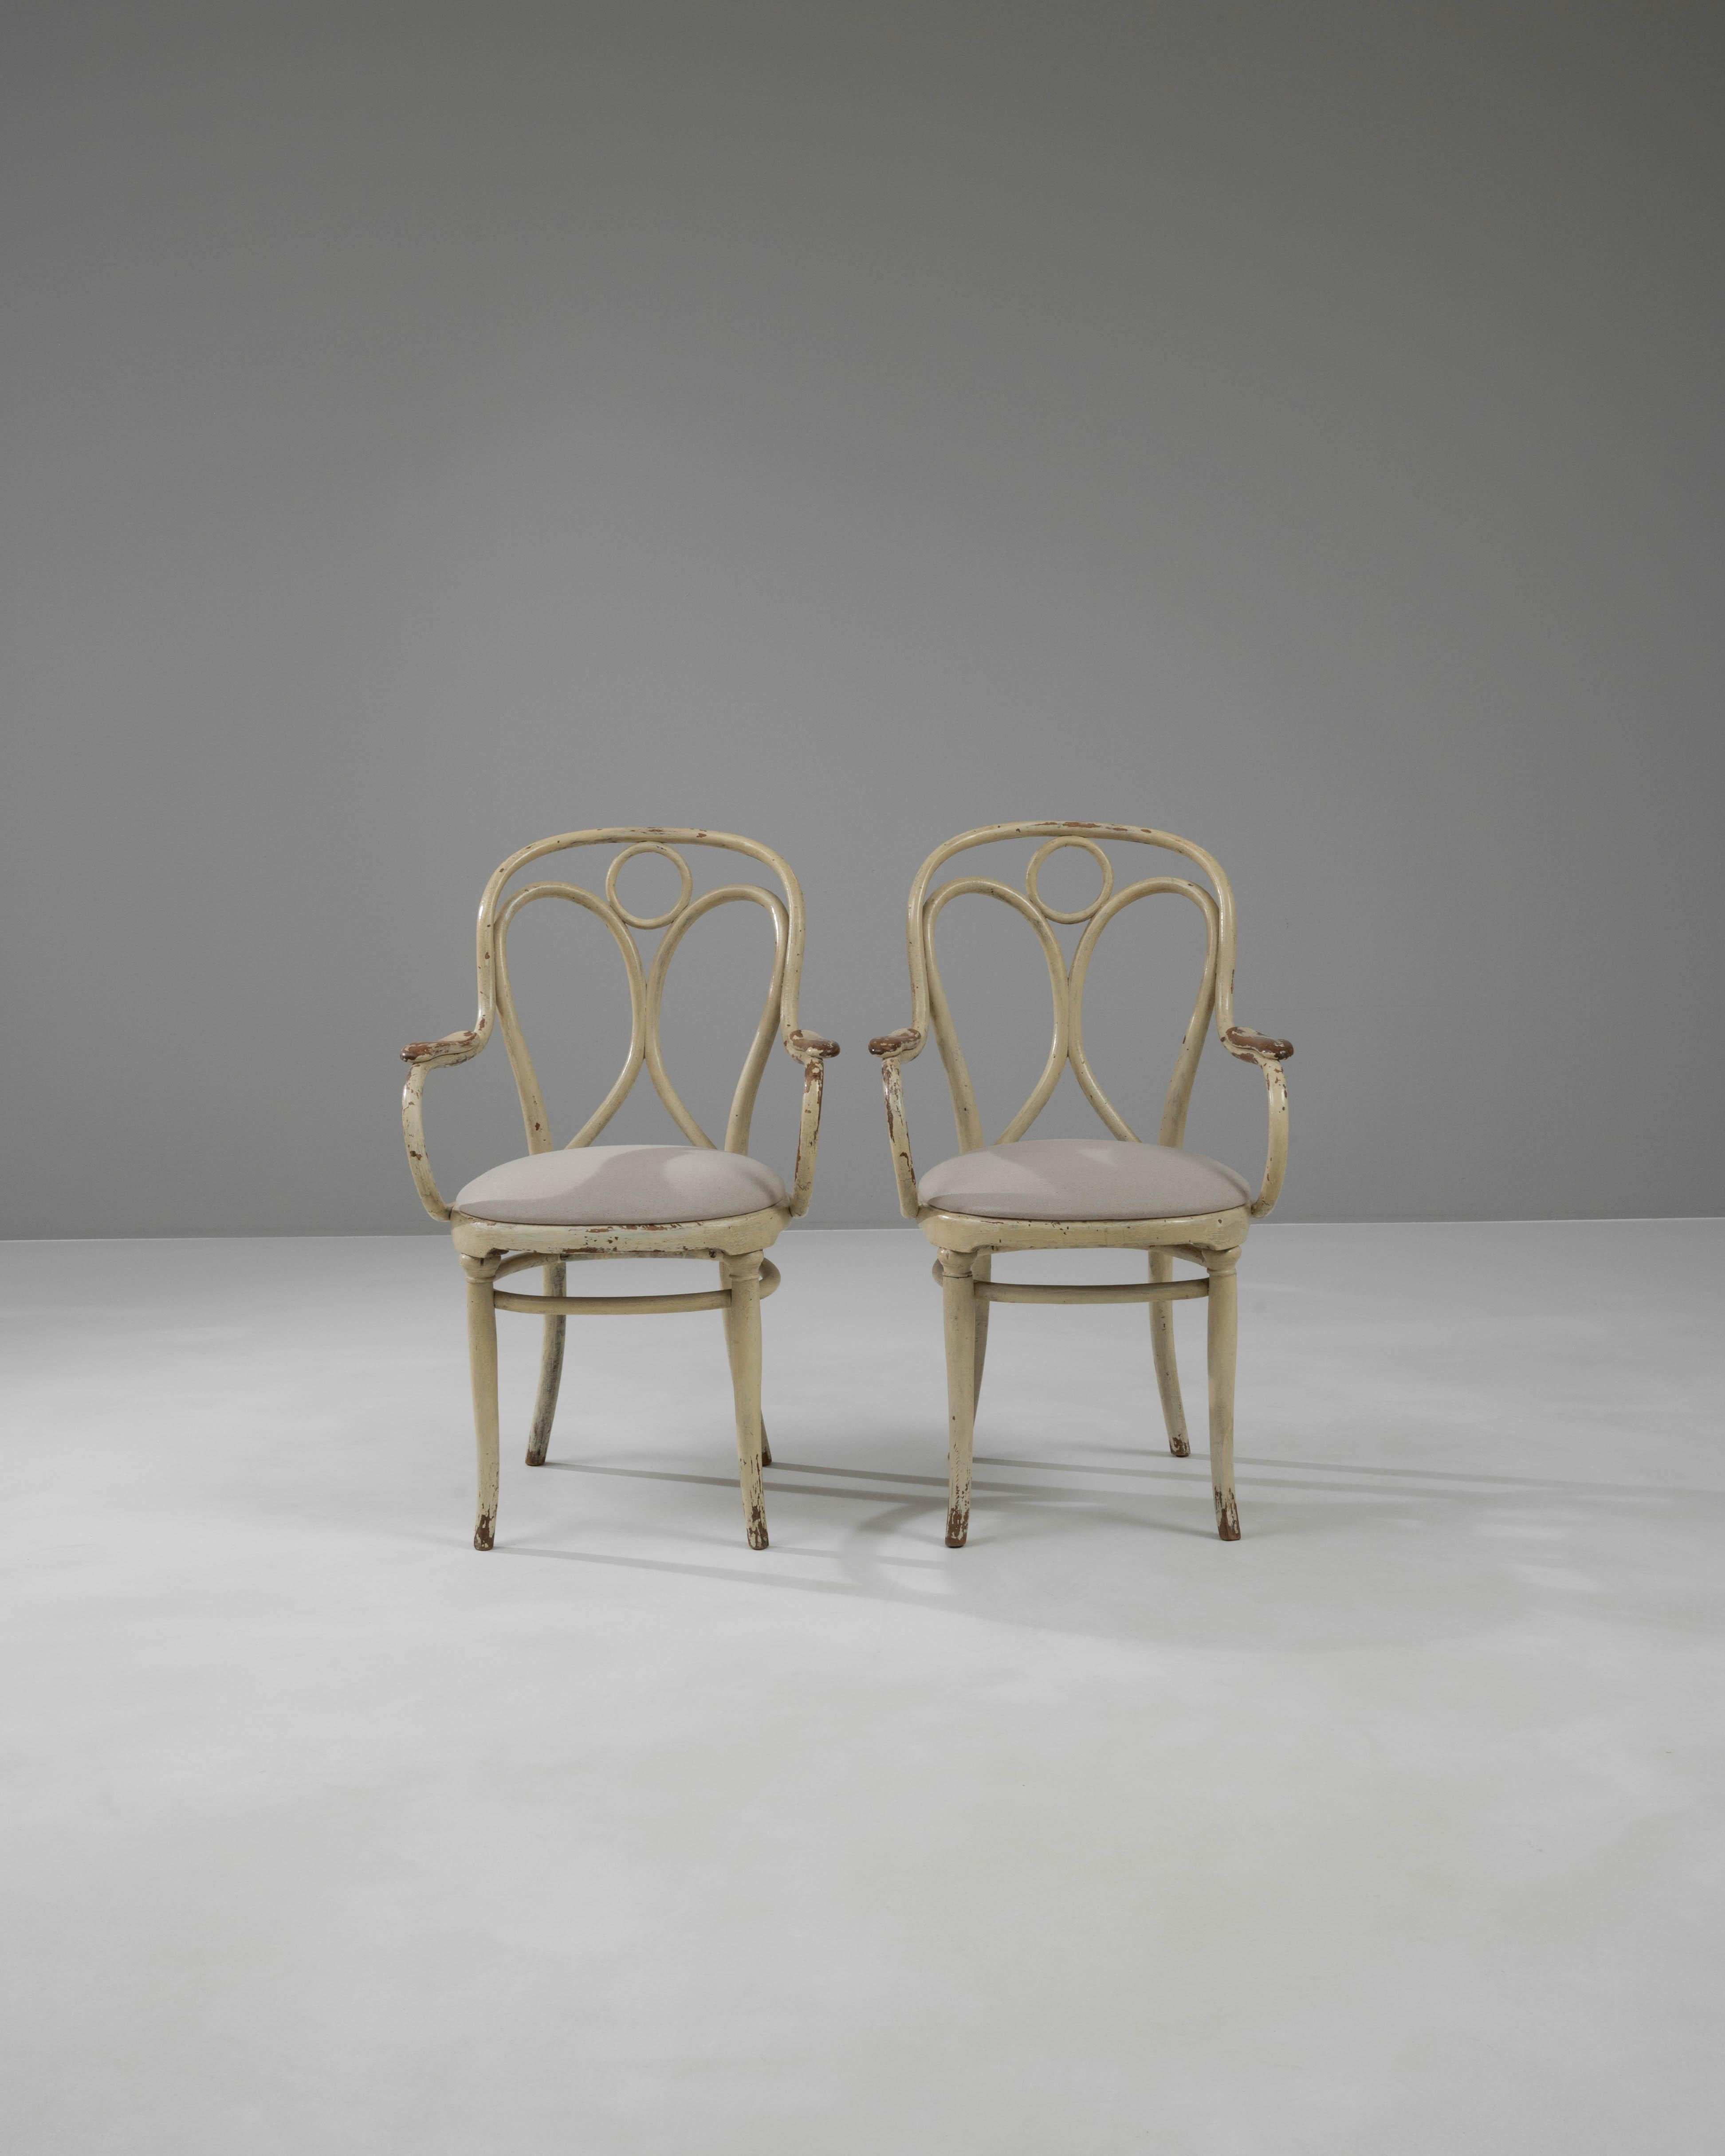 1900s Austrian Wooden Chairs, a Pair For Sale 1